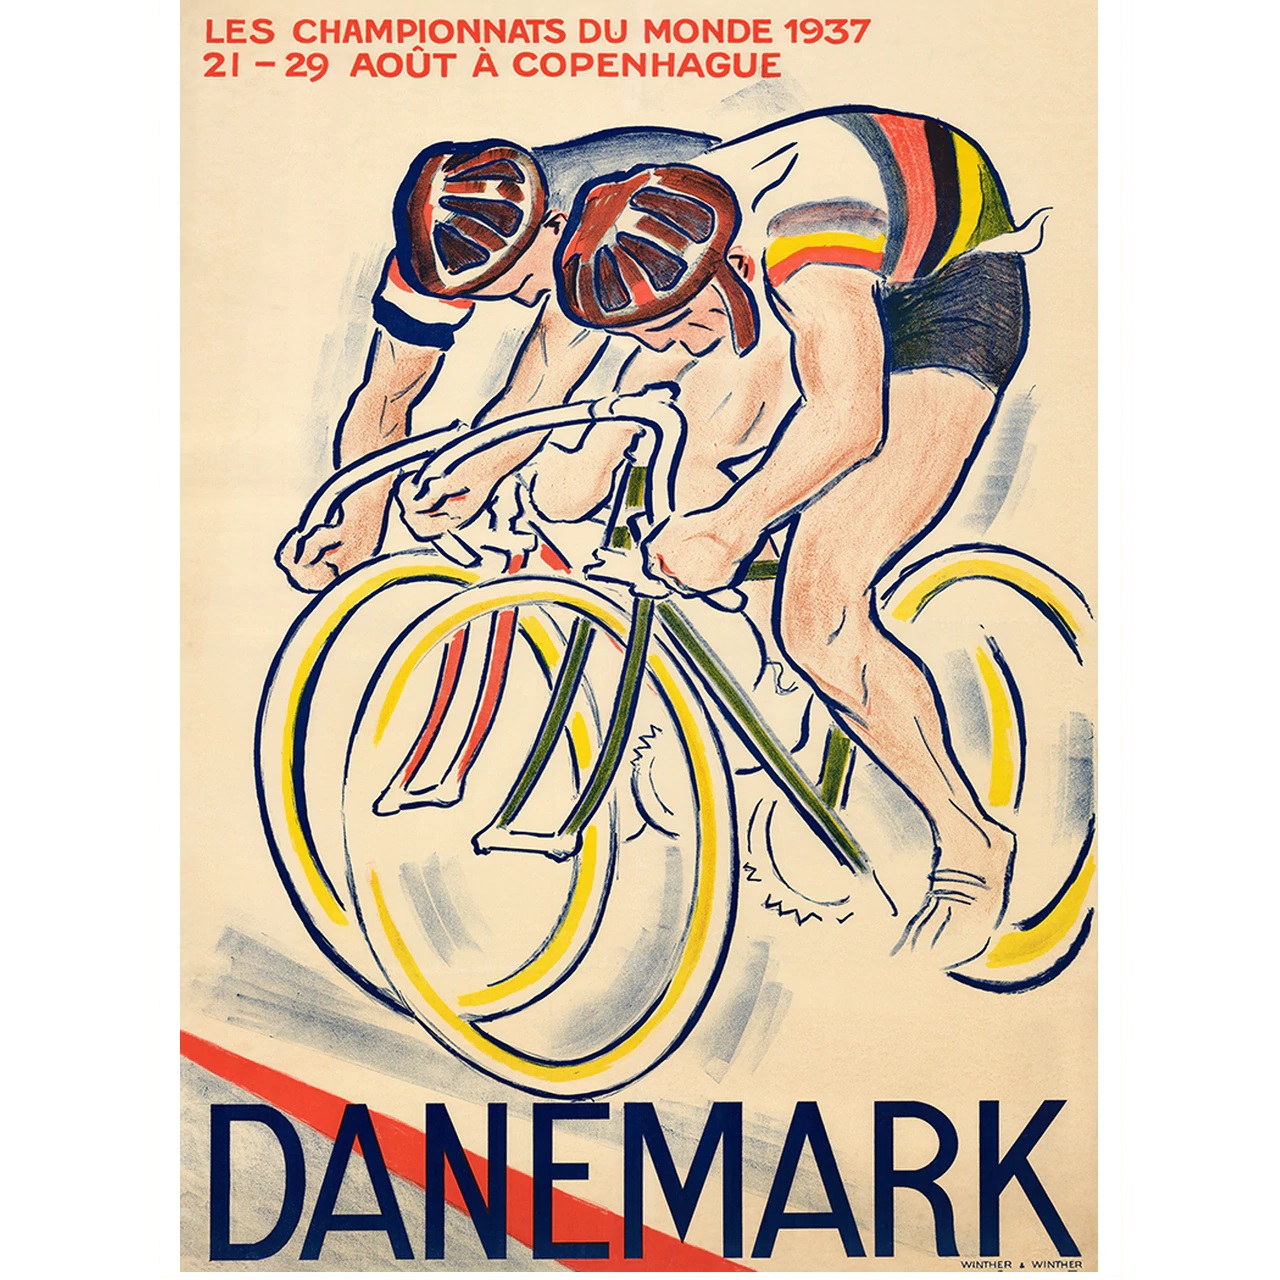 1937 World Championships Cycling Poster Vintage Bicycling Art Poster